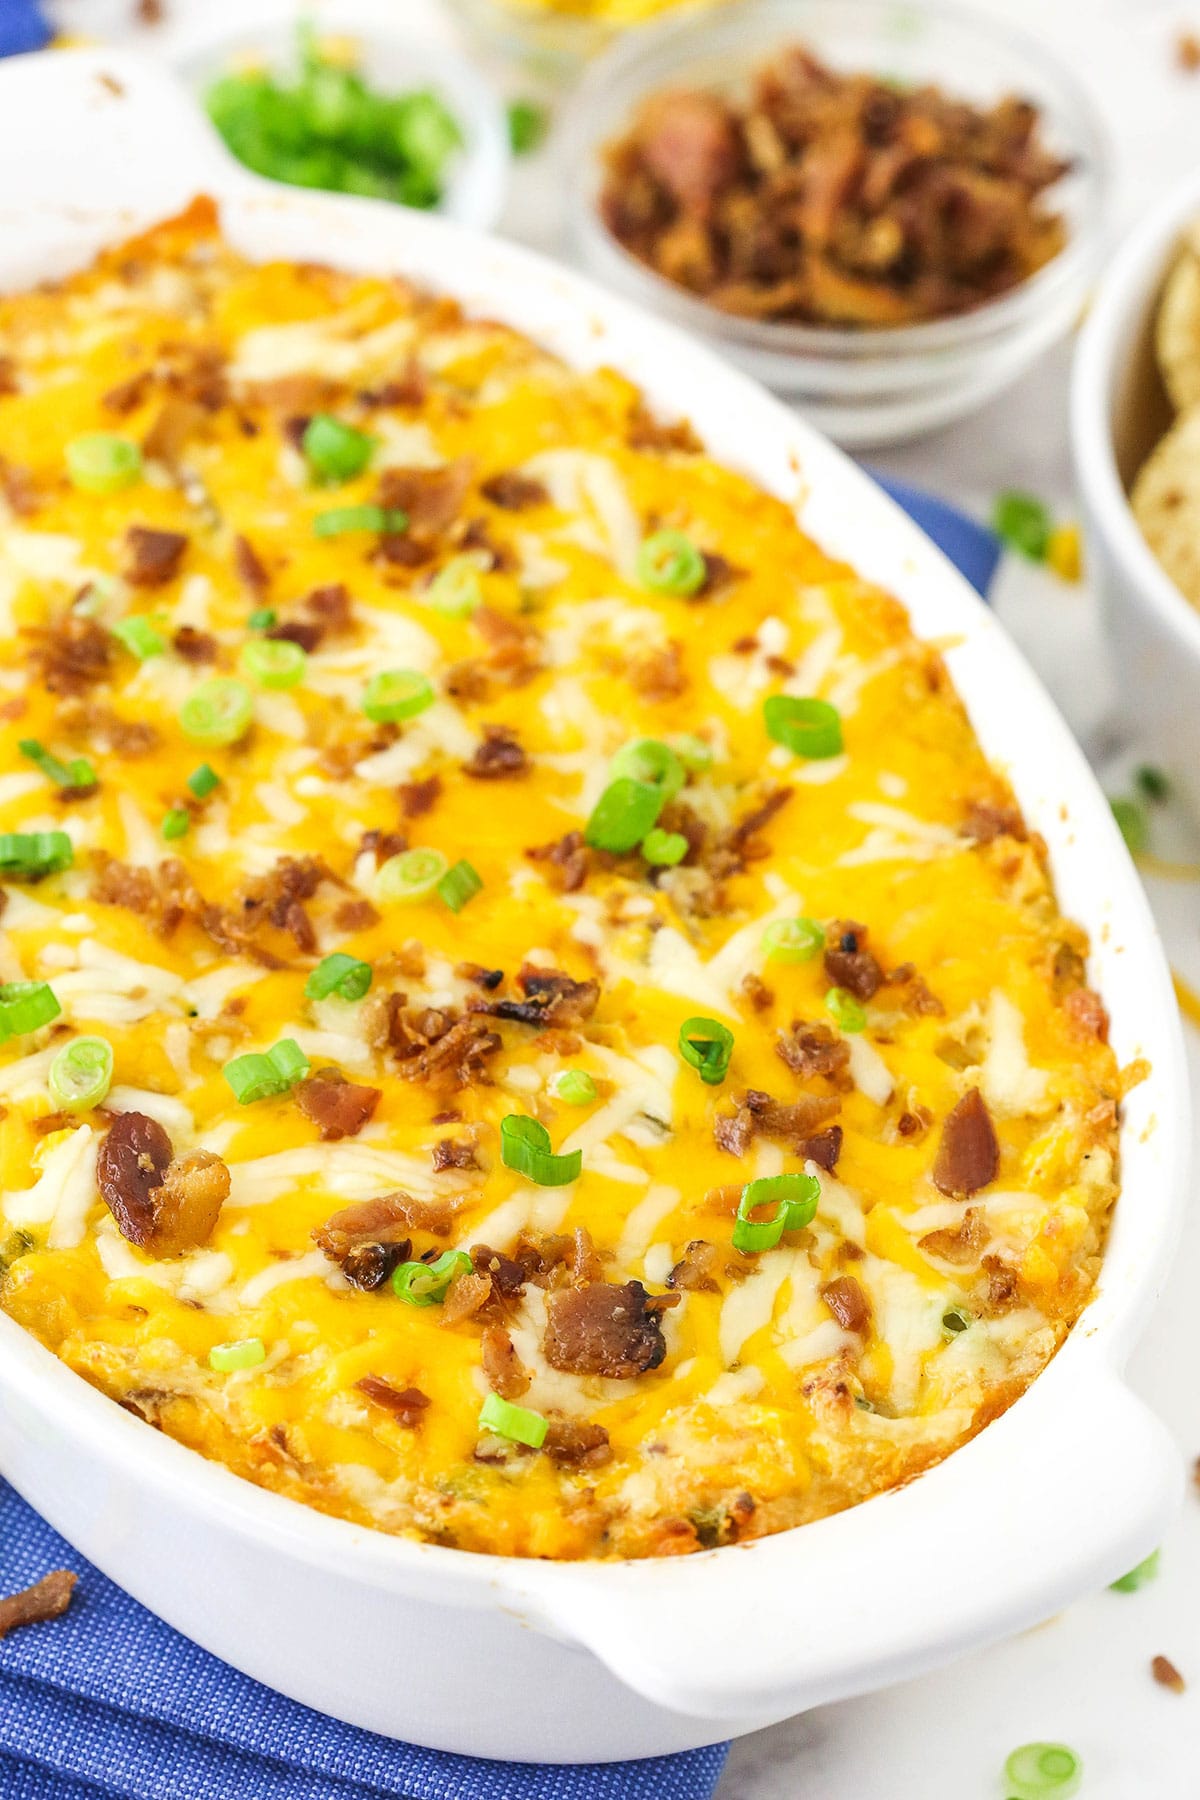 A serving dish full of cheesy Mexican-style dip beside a bowl of bacon bits and chopped green onions